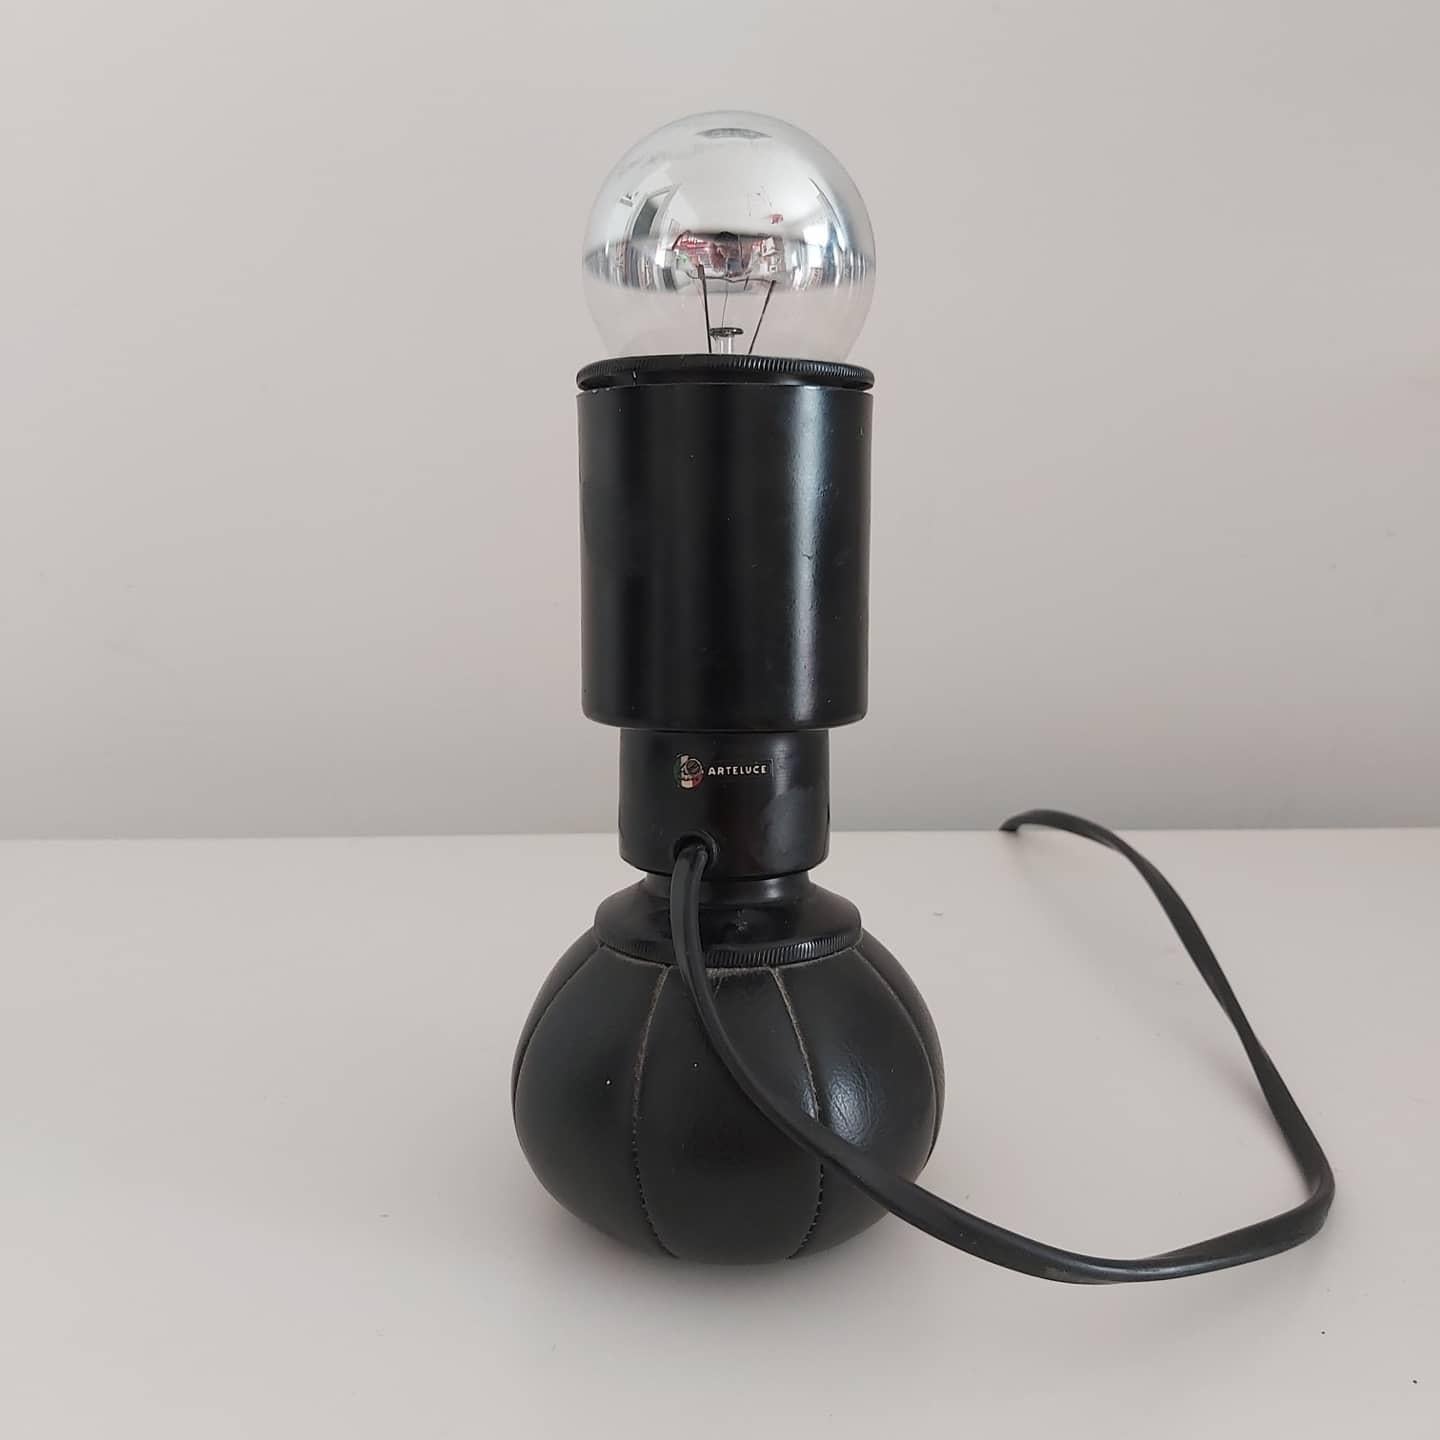 Gino Sarfatti 600G lamp, for Arteluce, Italy, 1966.

Adjustable in all directions.